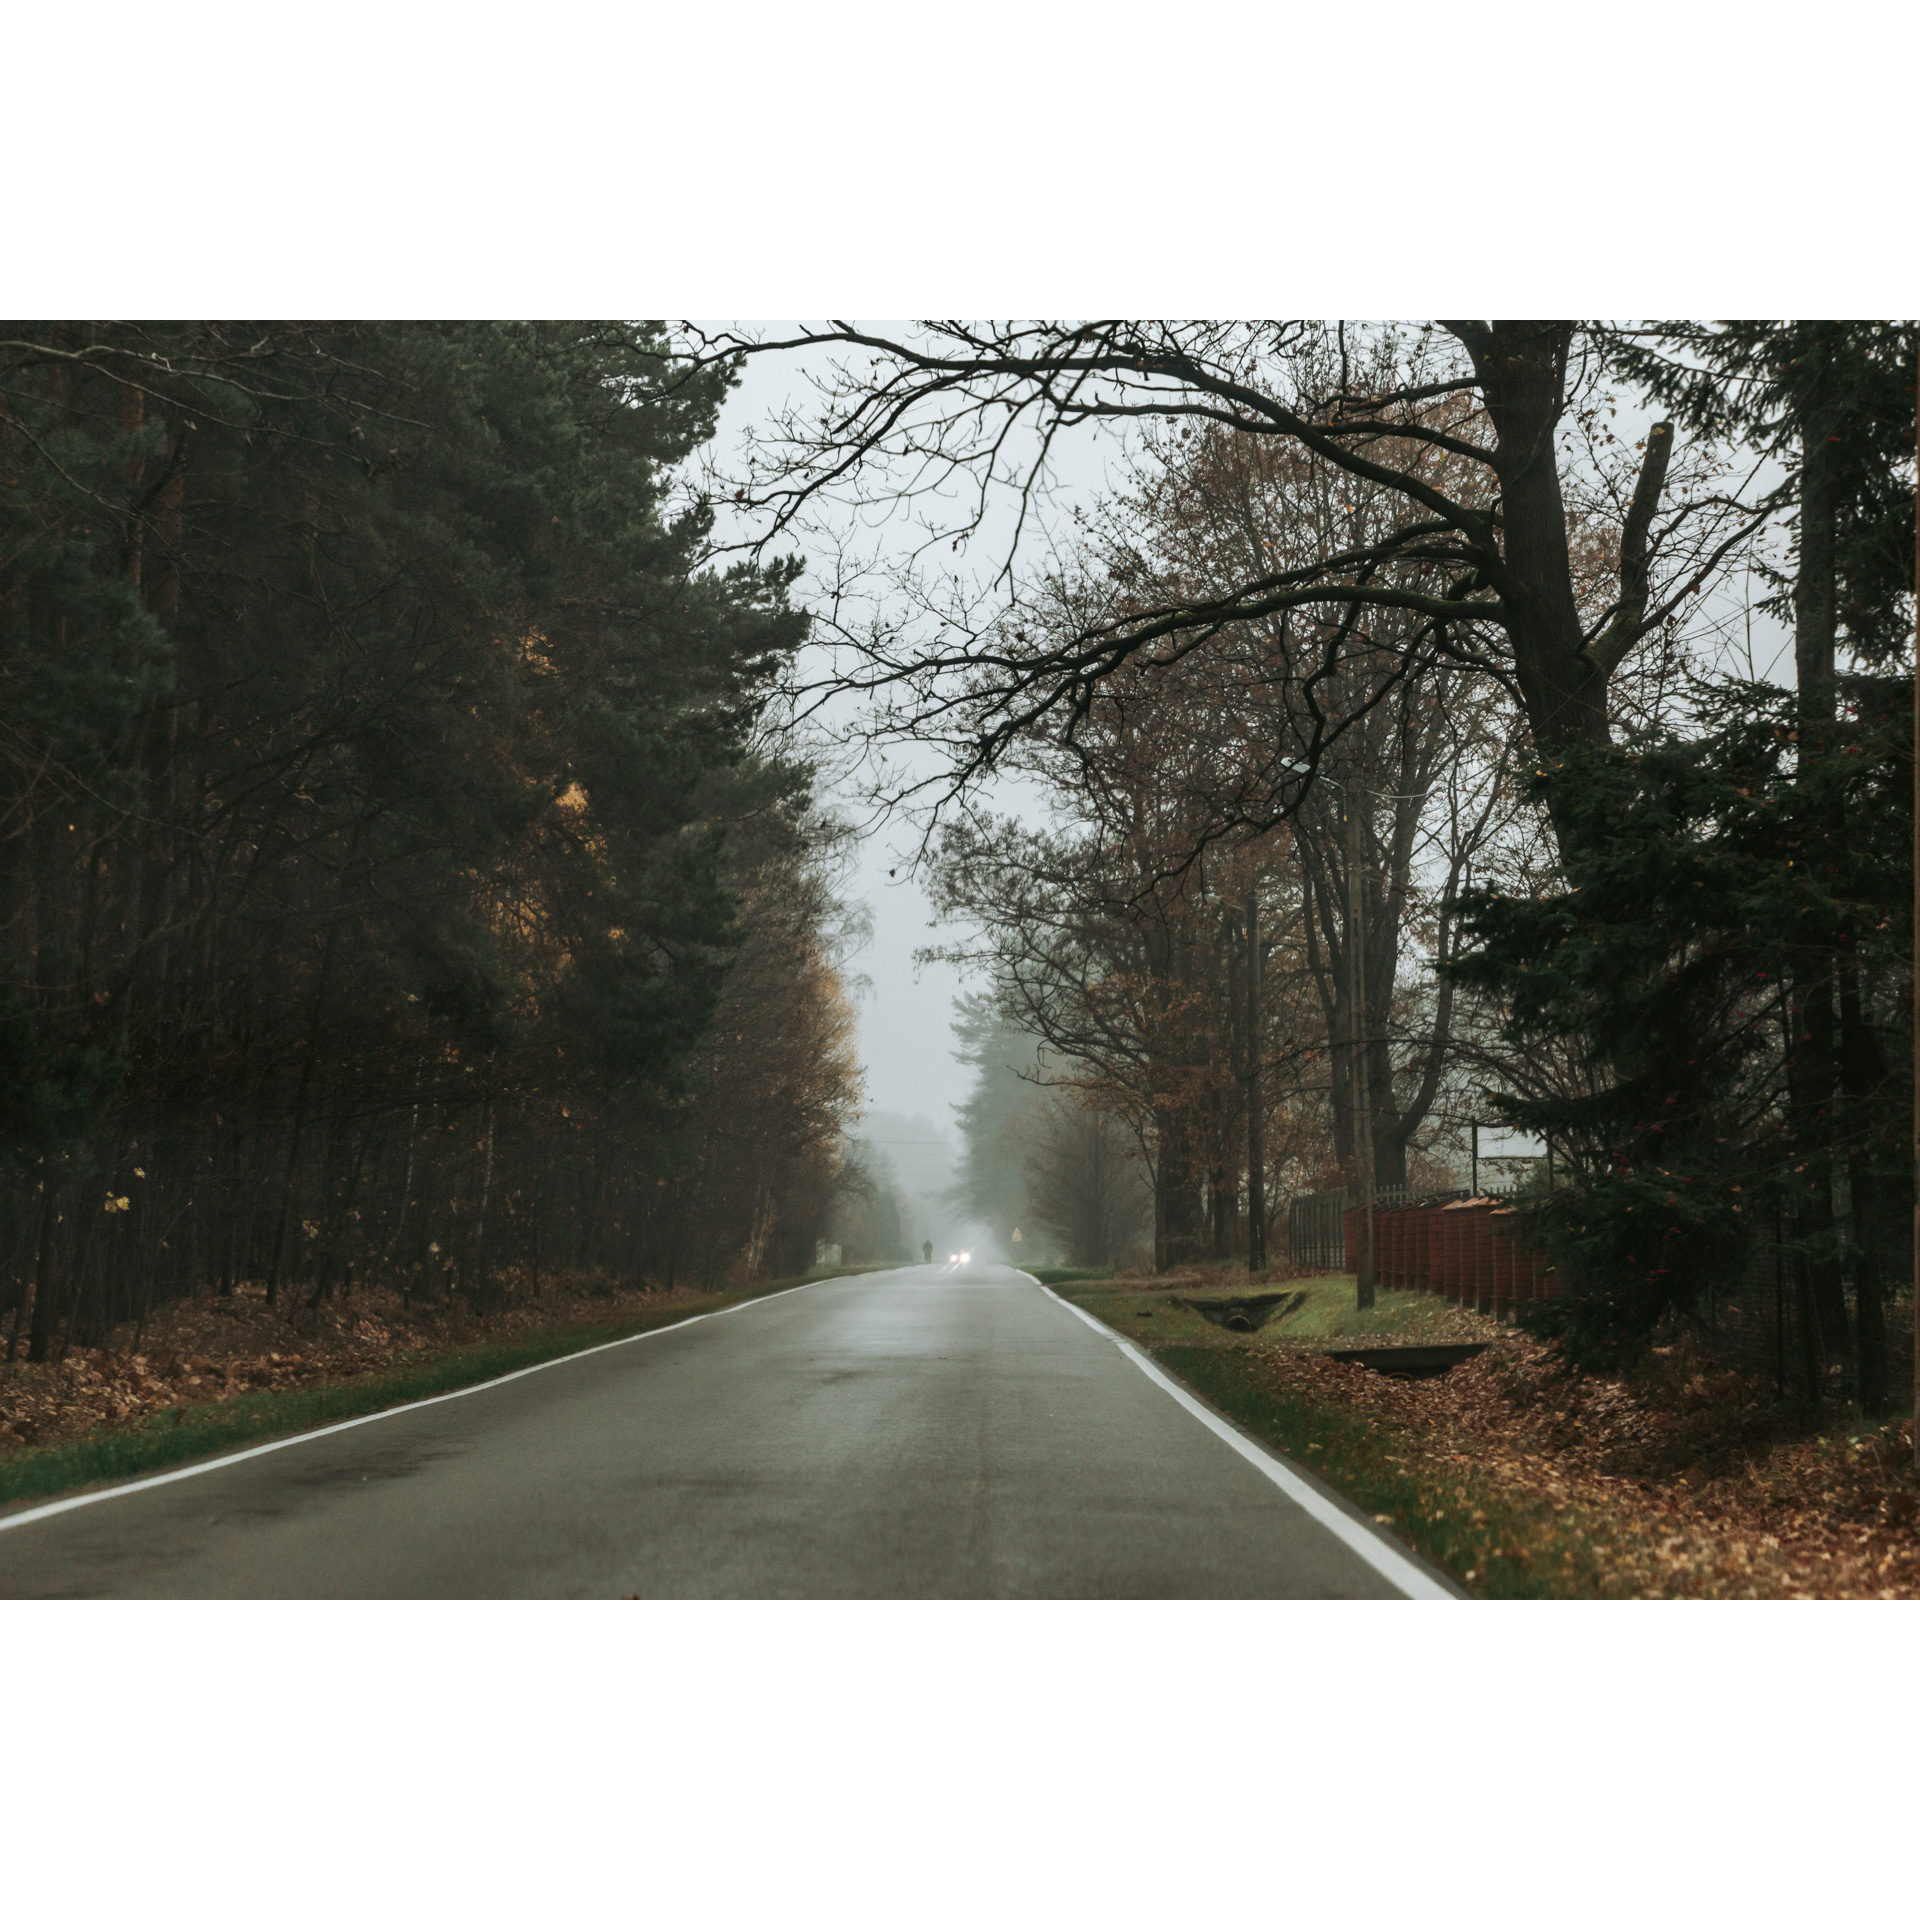 Asphalt road running through the forest and gray misty sky